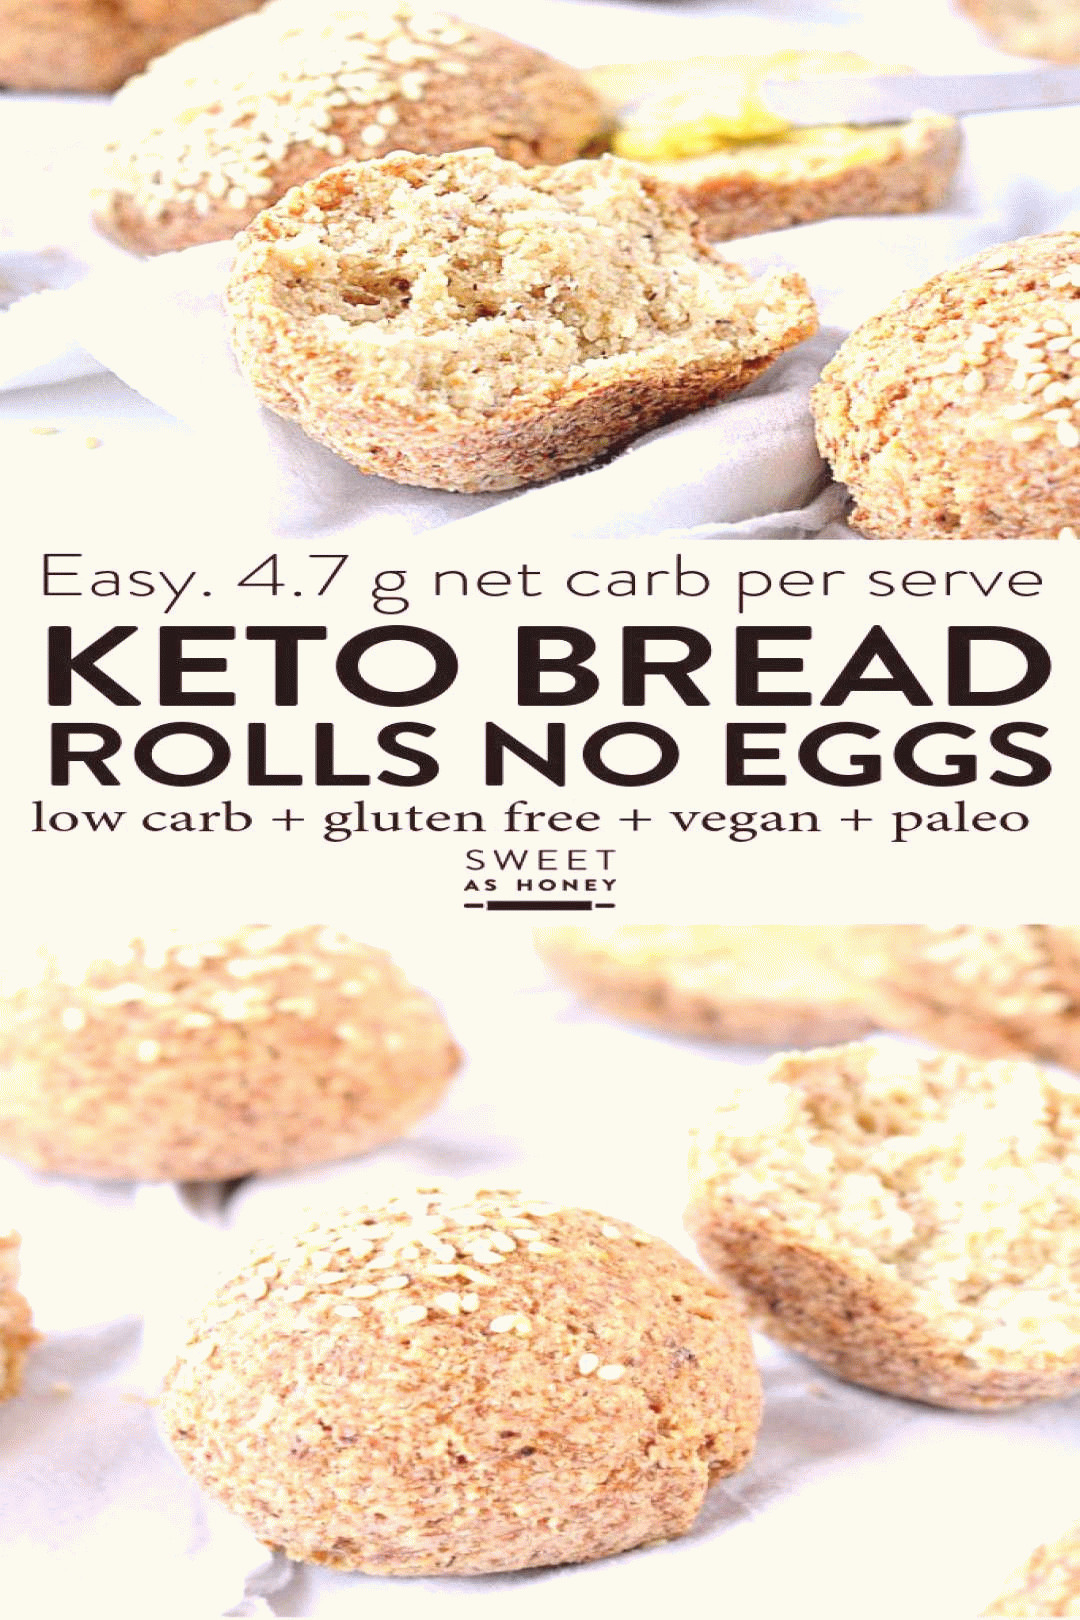 20 Fascinating Keto Bread Rolls No Eggs - Best Product Reviews